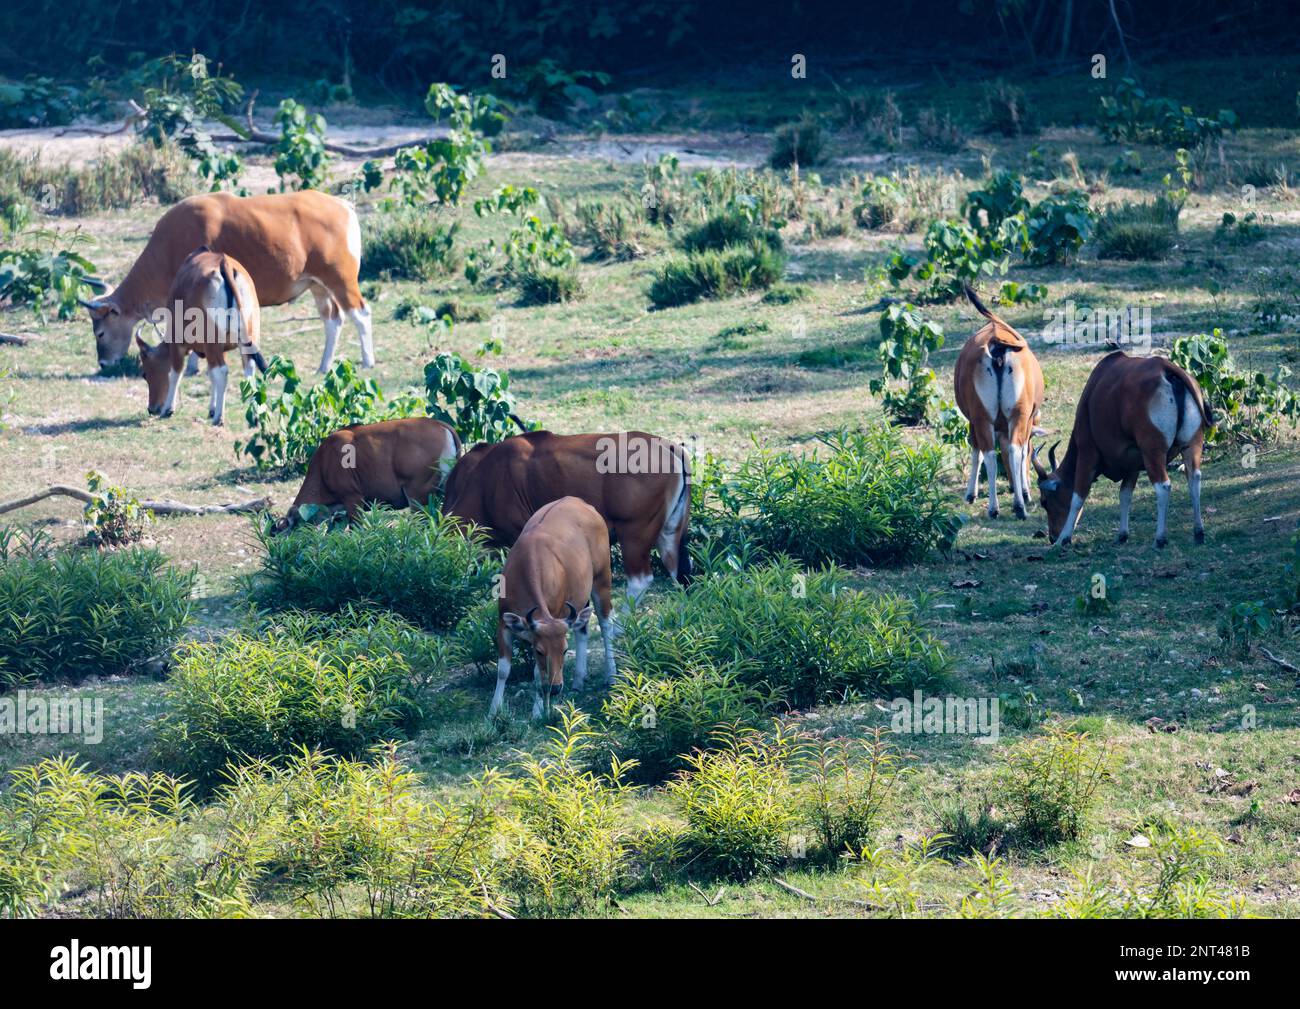 A herd of endangered Banteng (Bos javanicus) grazing in the wild. Thailand. Stock Photo